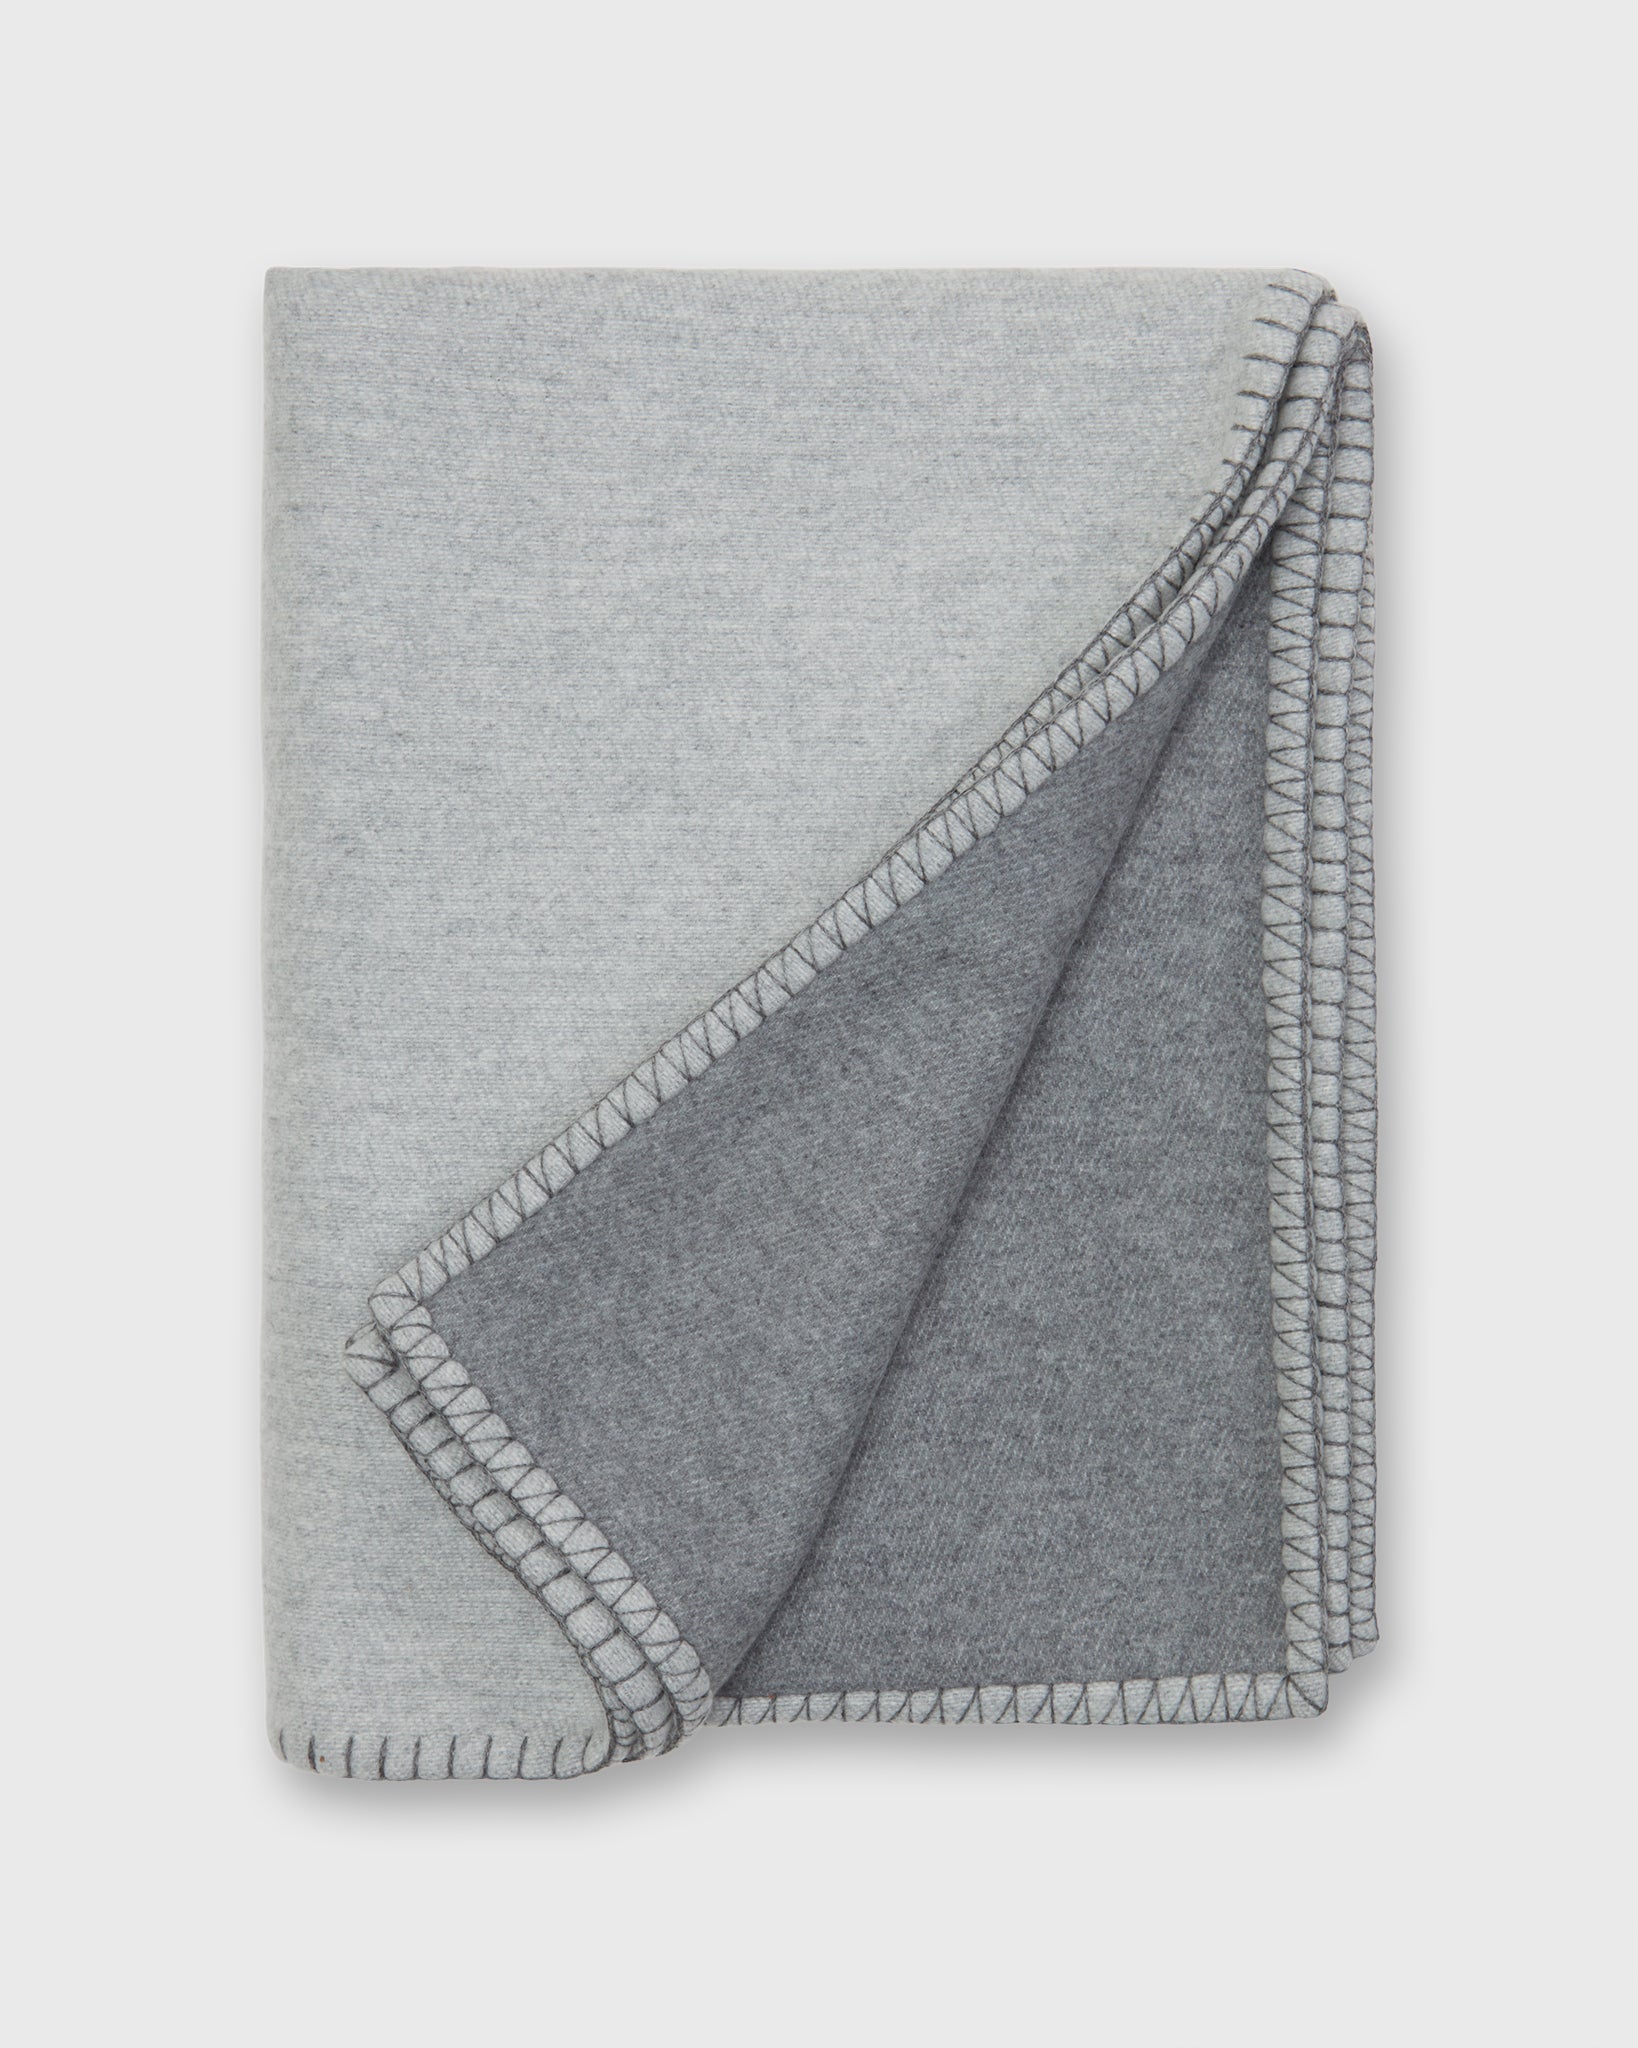 Stitched Reversible Throw Blanket in Silver/Grey Wool/Cashmere